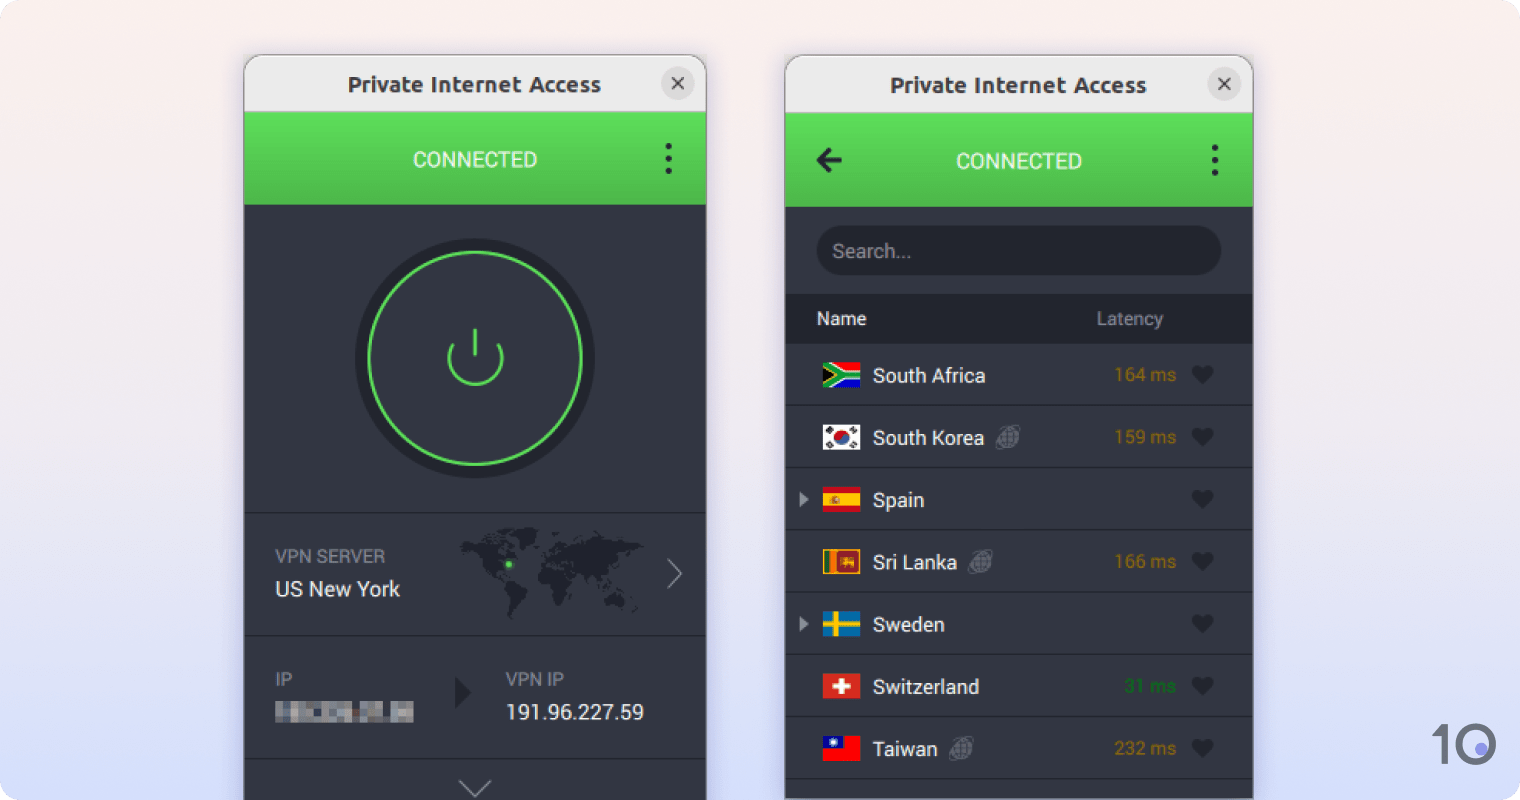 Private Internet Access on Linux